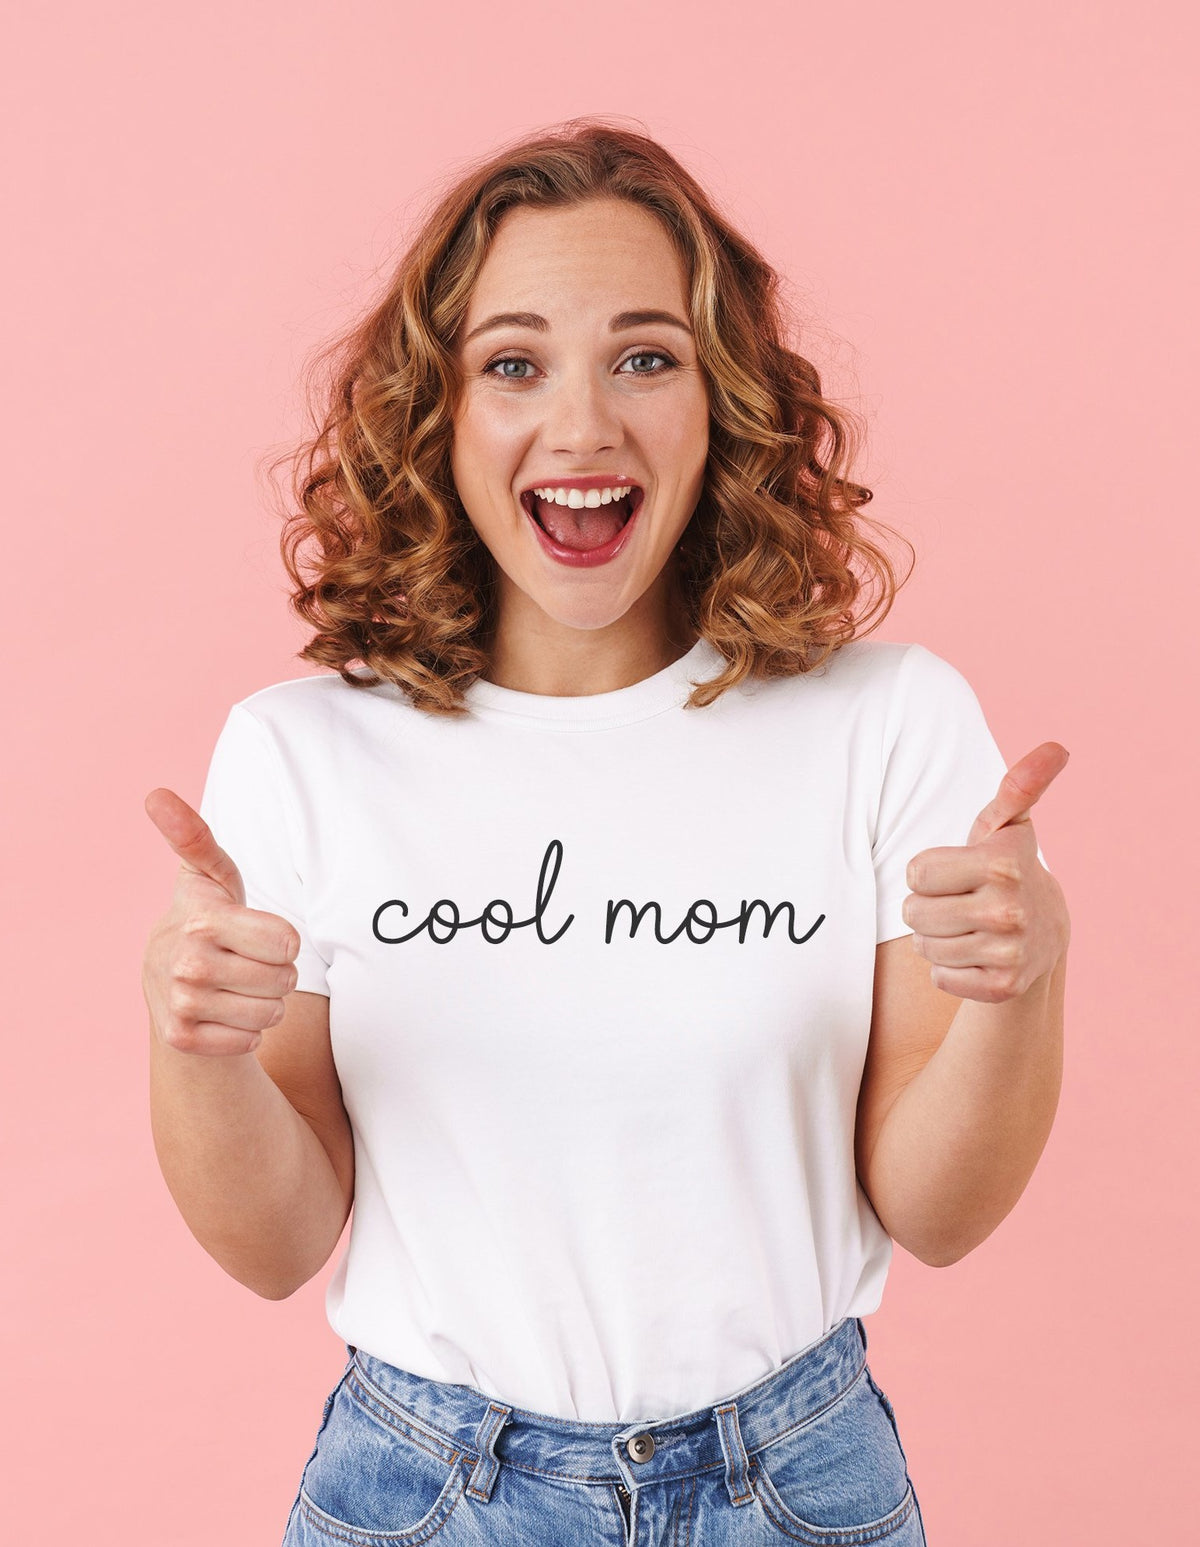 Cool Mom Mother's Day T-Shirt Gift,Mother's Day Gift,Cool Mom Shirt,Mom Apparel,Mother's Day Gift for friend,Gift for Mom,Made in USA 